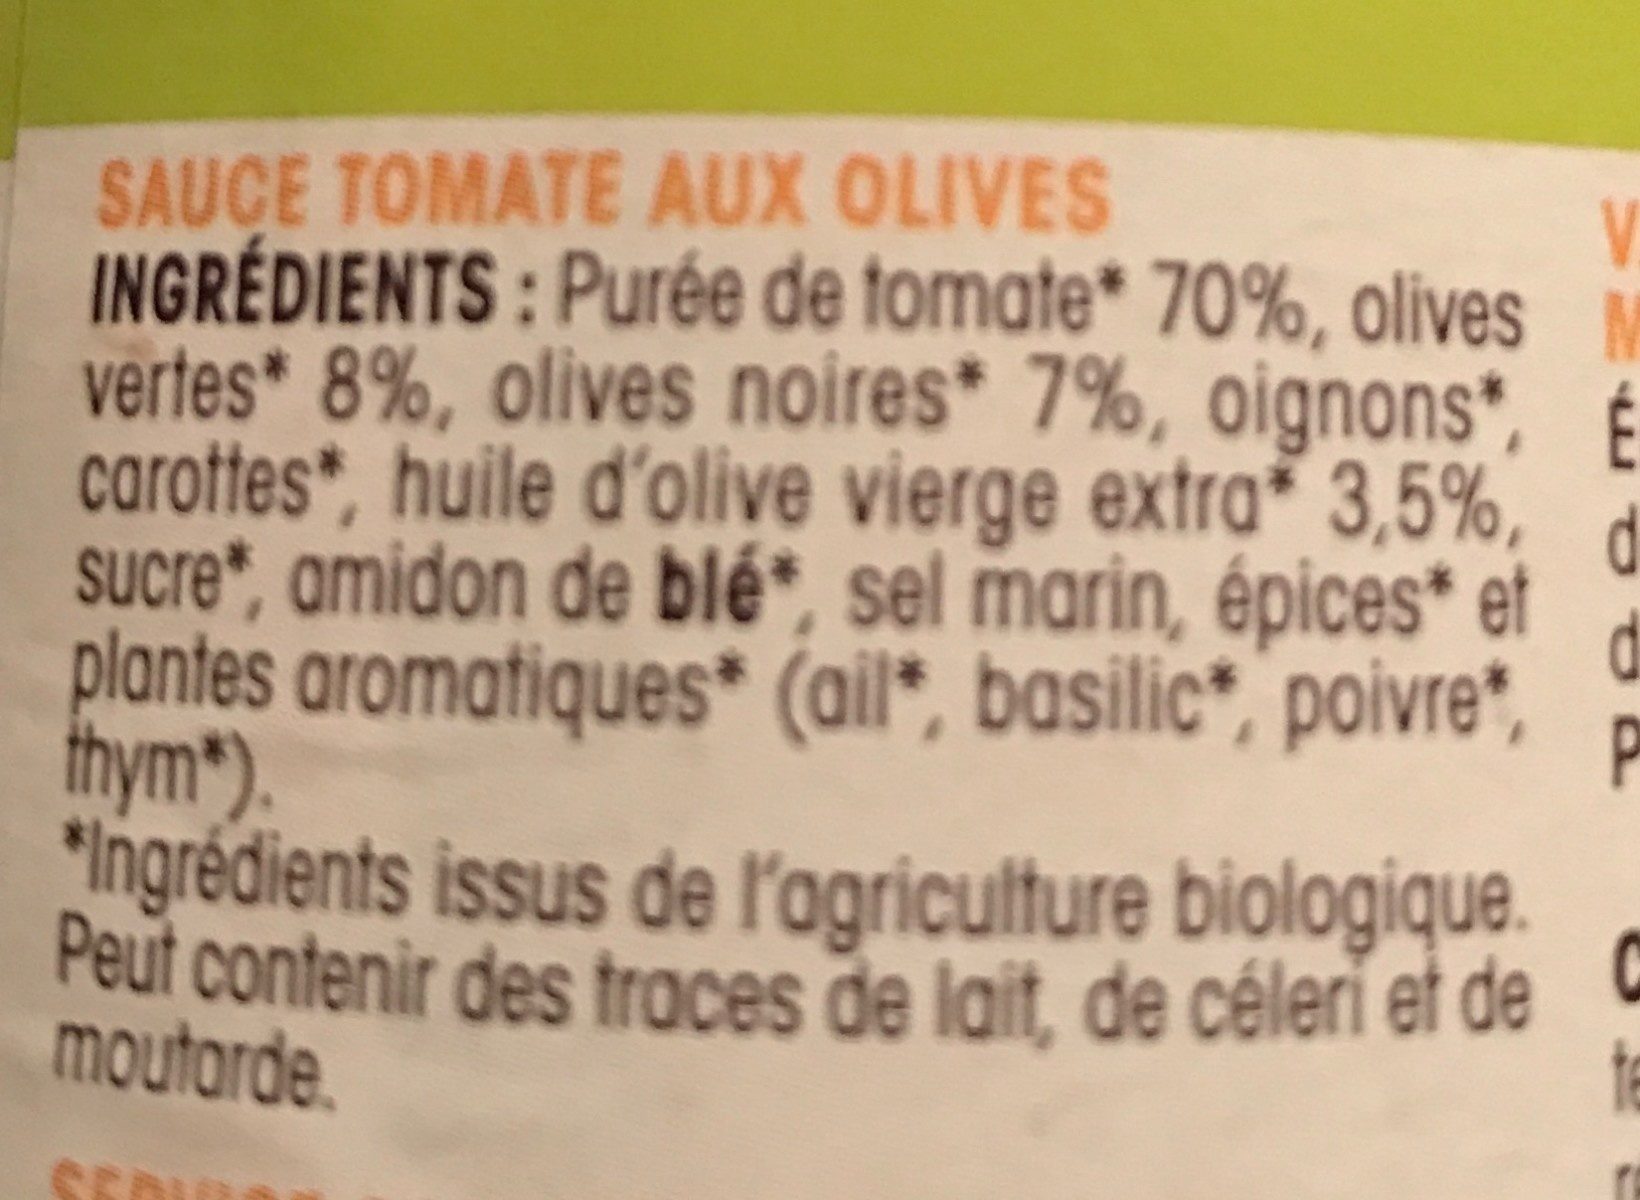 Ma sauce tomate bio aux olives - Ingredients - fr